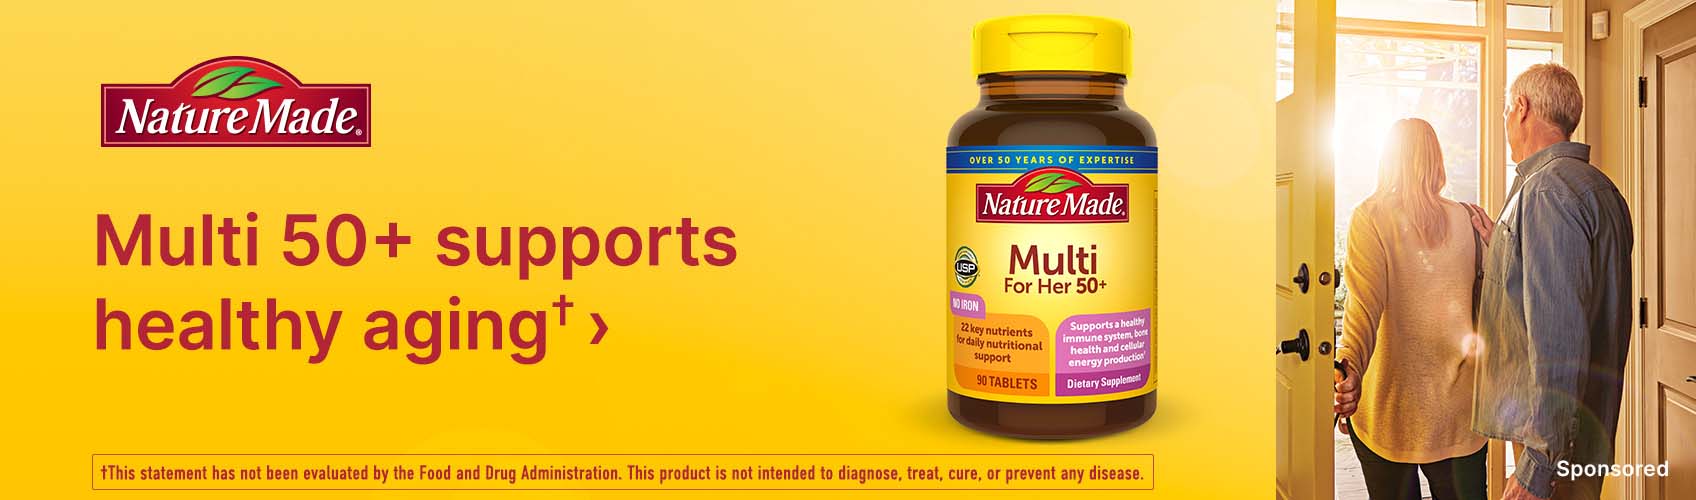 Nature Made.(R) Multi 50+ supports healthy aging†. †This statement has not been evaluated by the Food and Drug Administration. This product is not intended to diagnose, treat, cure, or prevent any disease. Sponsored.